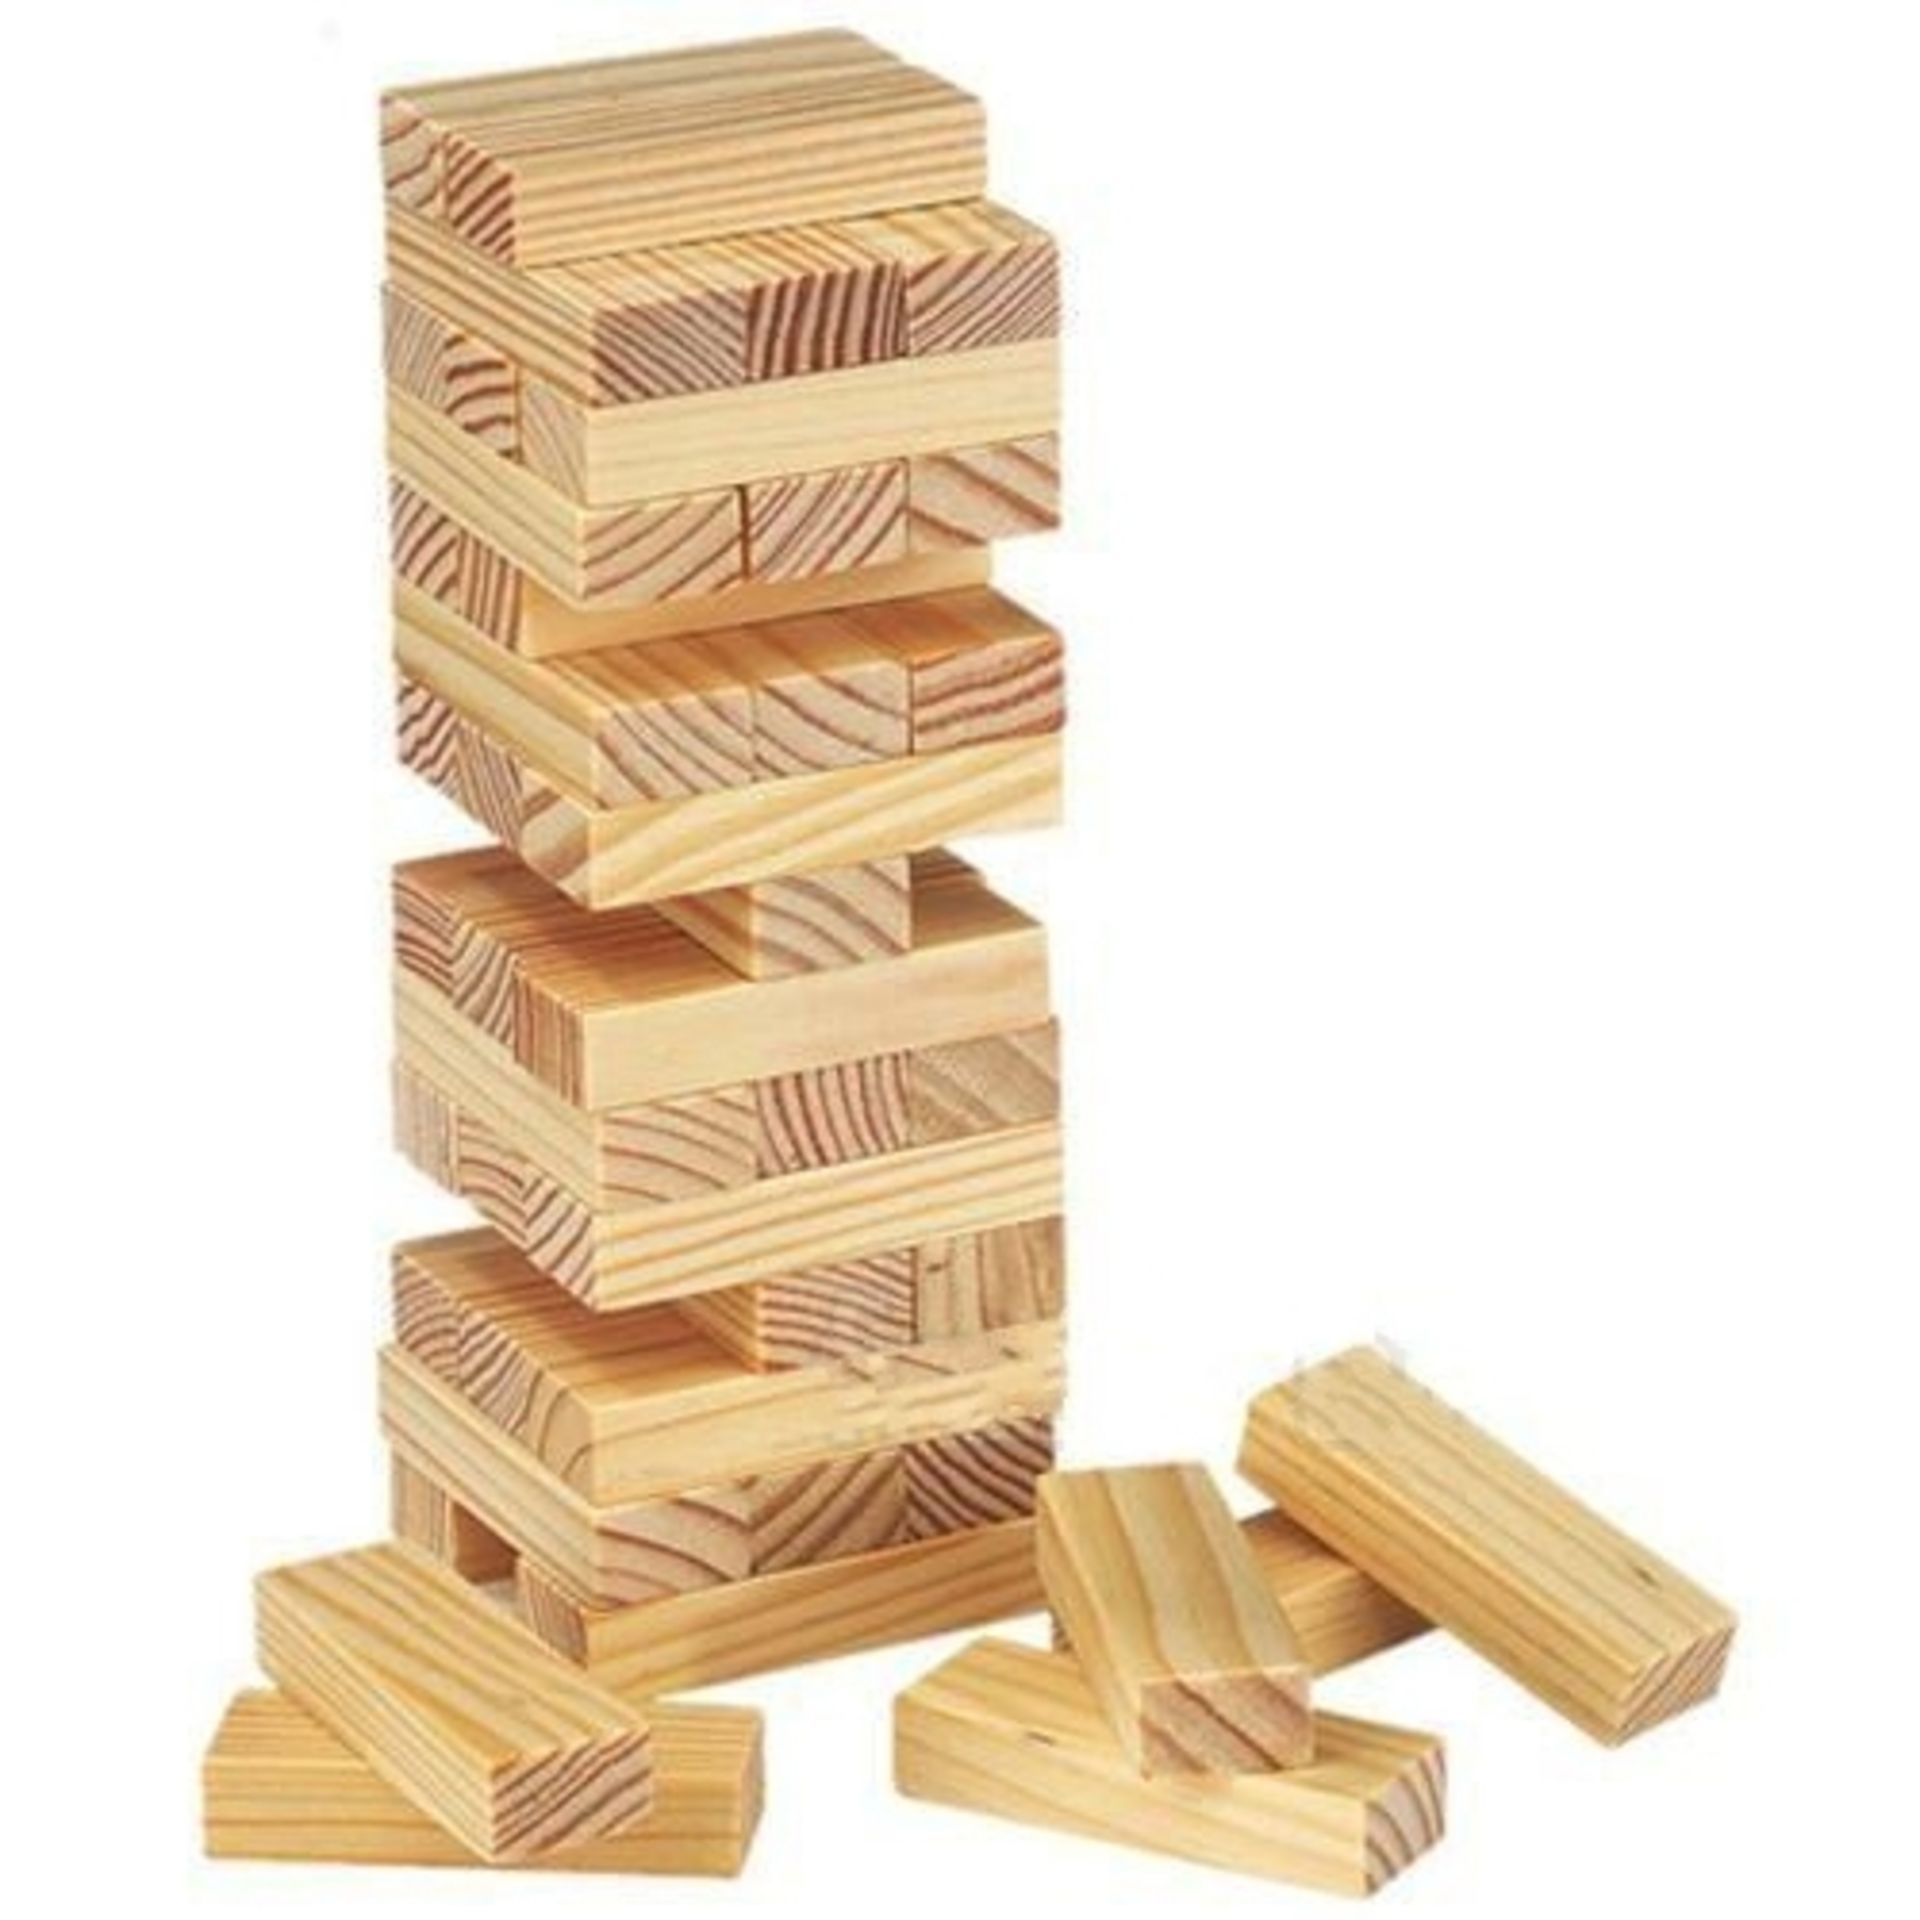 V *TRADE QTY* Brand New Quality Wooden Tower Block Game X 3 YOUR BID PRICE TO BE MULTIPLIED BY